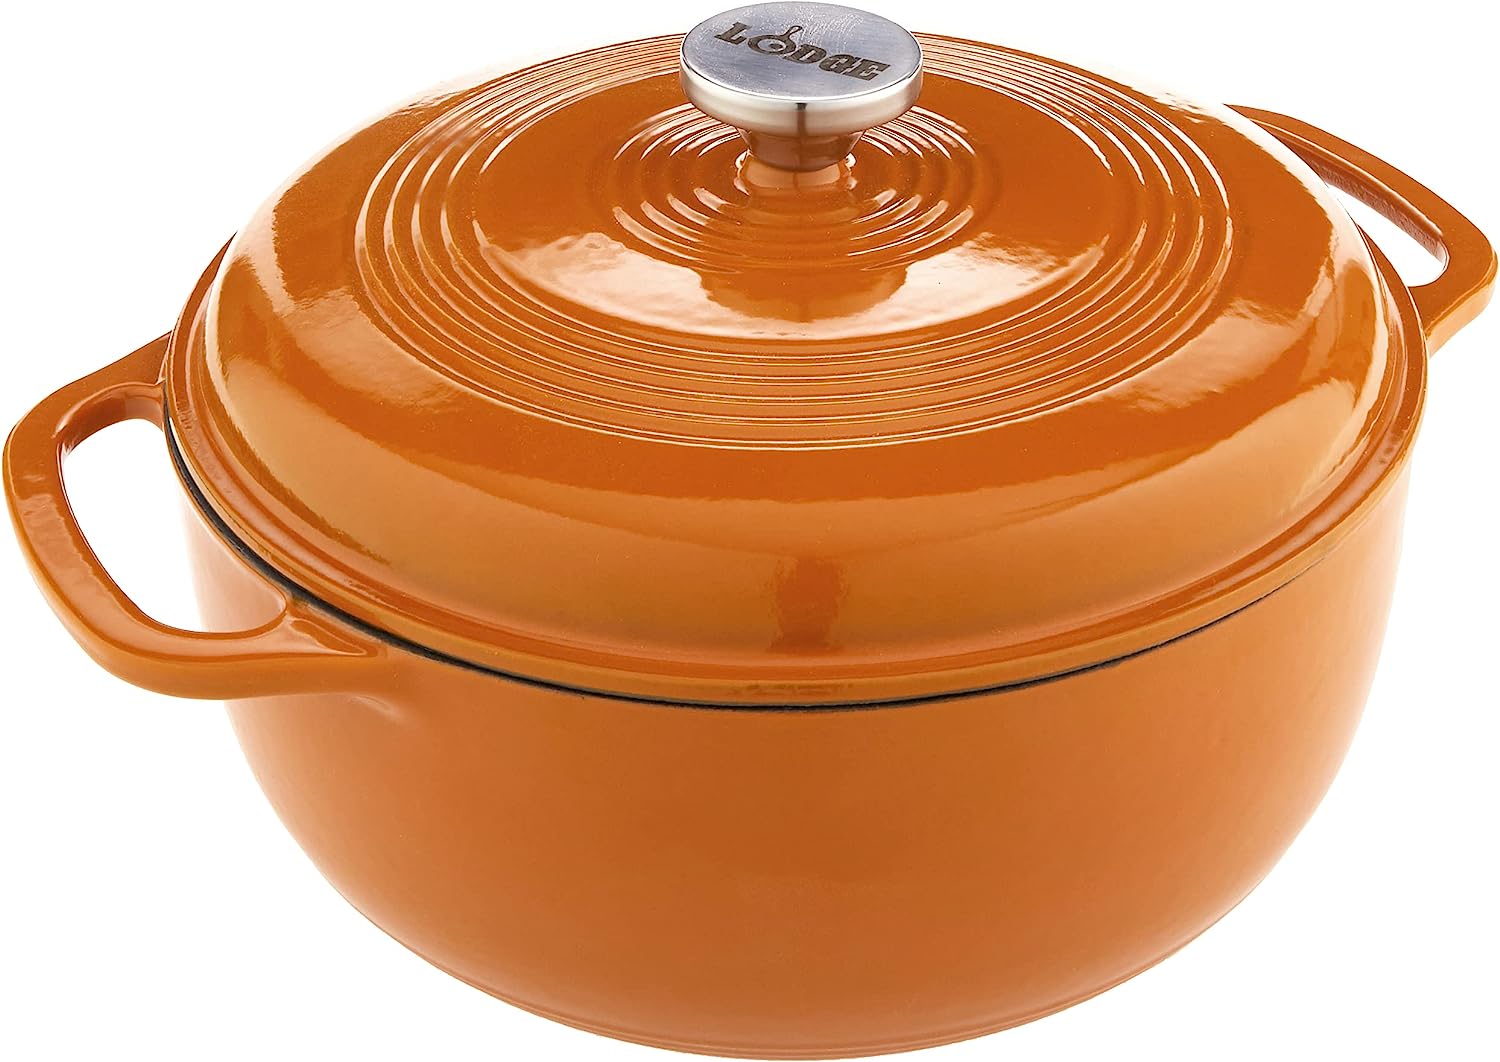 https://bigbigmart.com/wp-content/uploads/2023/07/Lodge-6-Quart-Enameled-Cast-Iron-Dutch-Oven-with-Lid-%E2%80%93-Dual-Handles-%E2%80%93-Oven-Safe-up-to-500%C2%B0-F-or-on-Stovetop-Use-to-Marinate-Cook-Bake-Refrigerate-and-Serve-%E2%80%93-Apricot.jpg